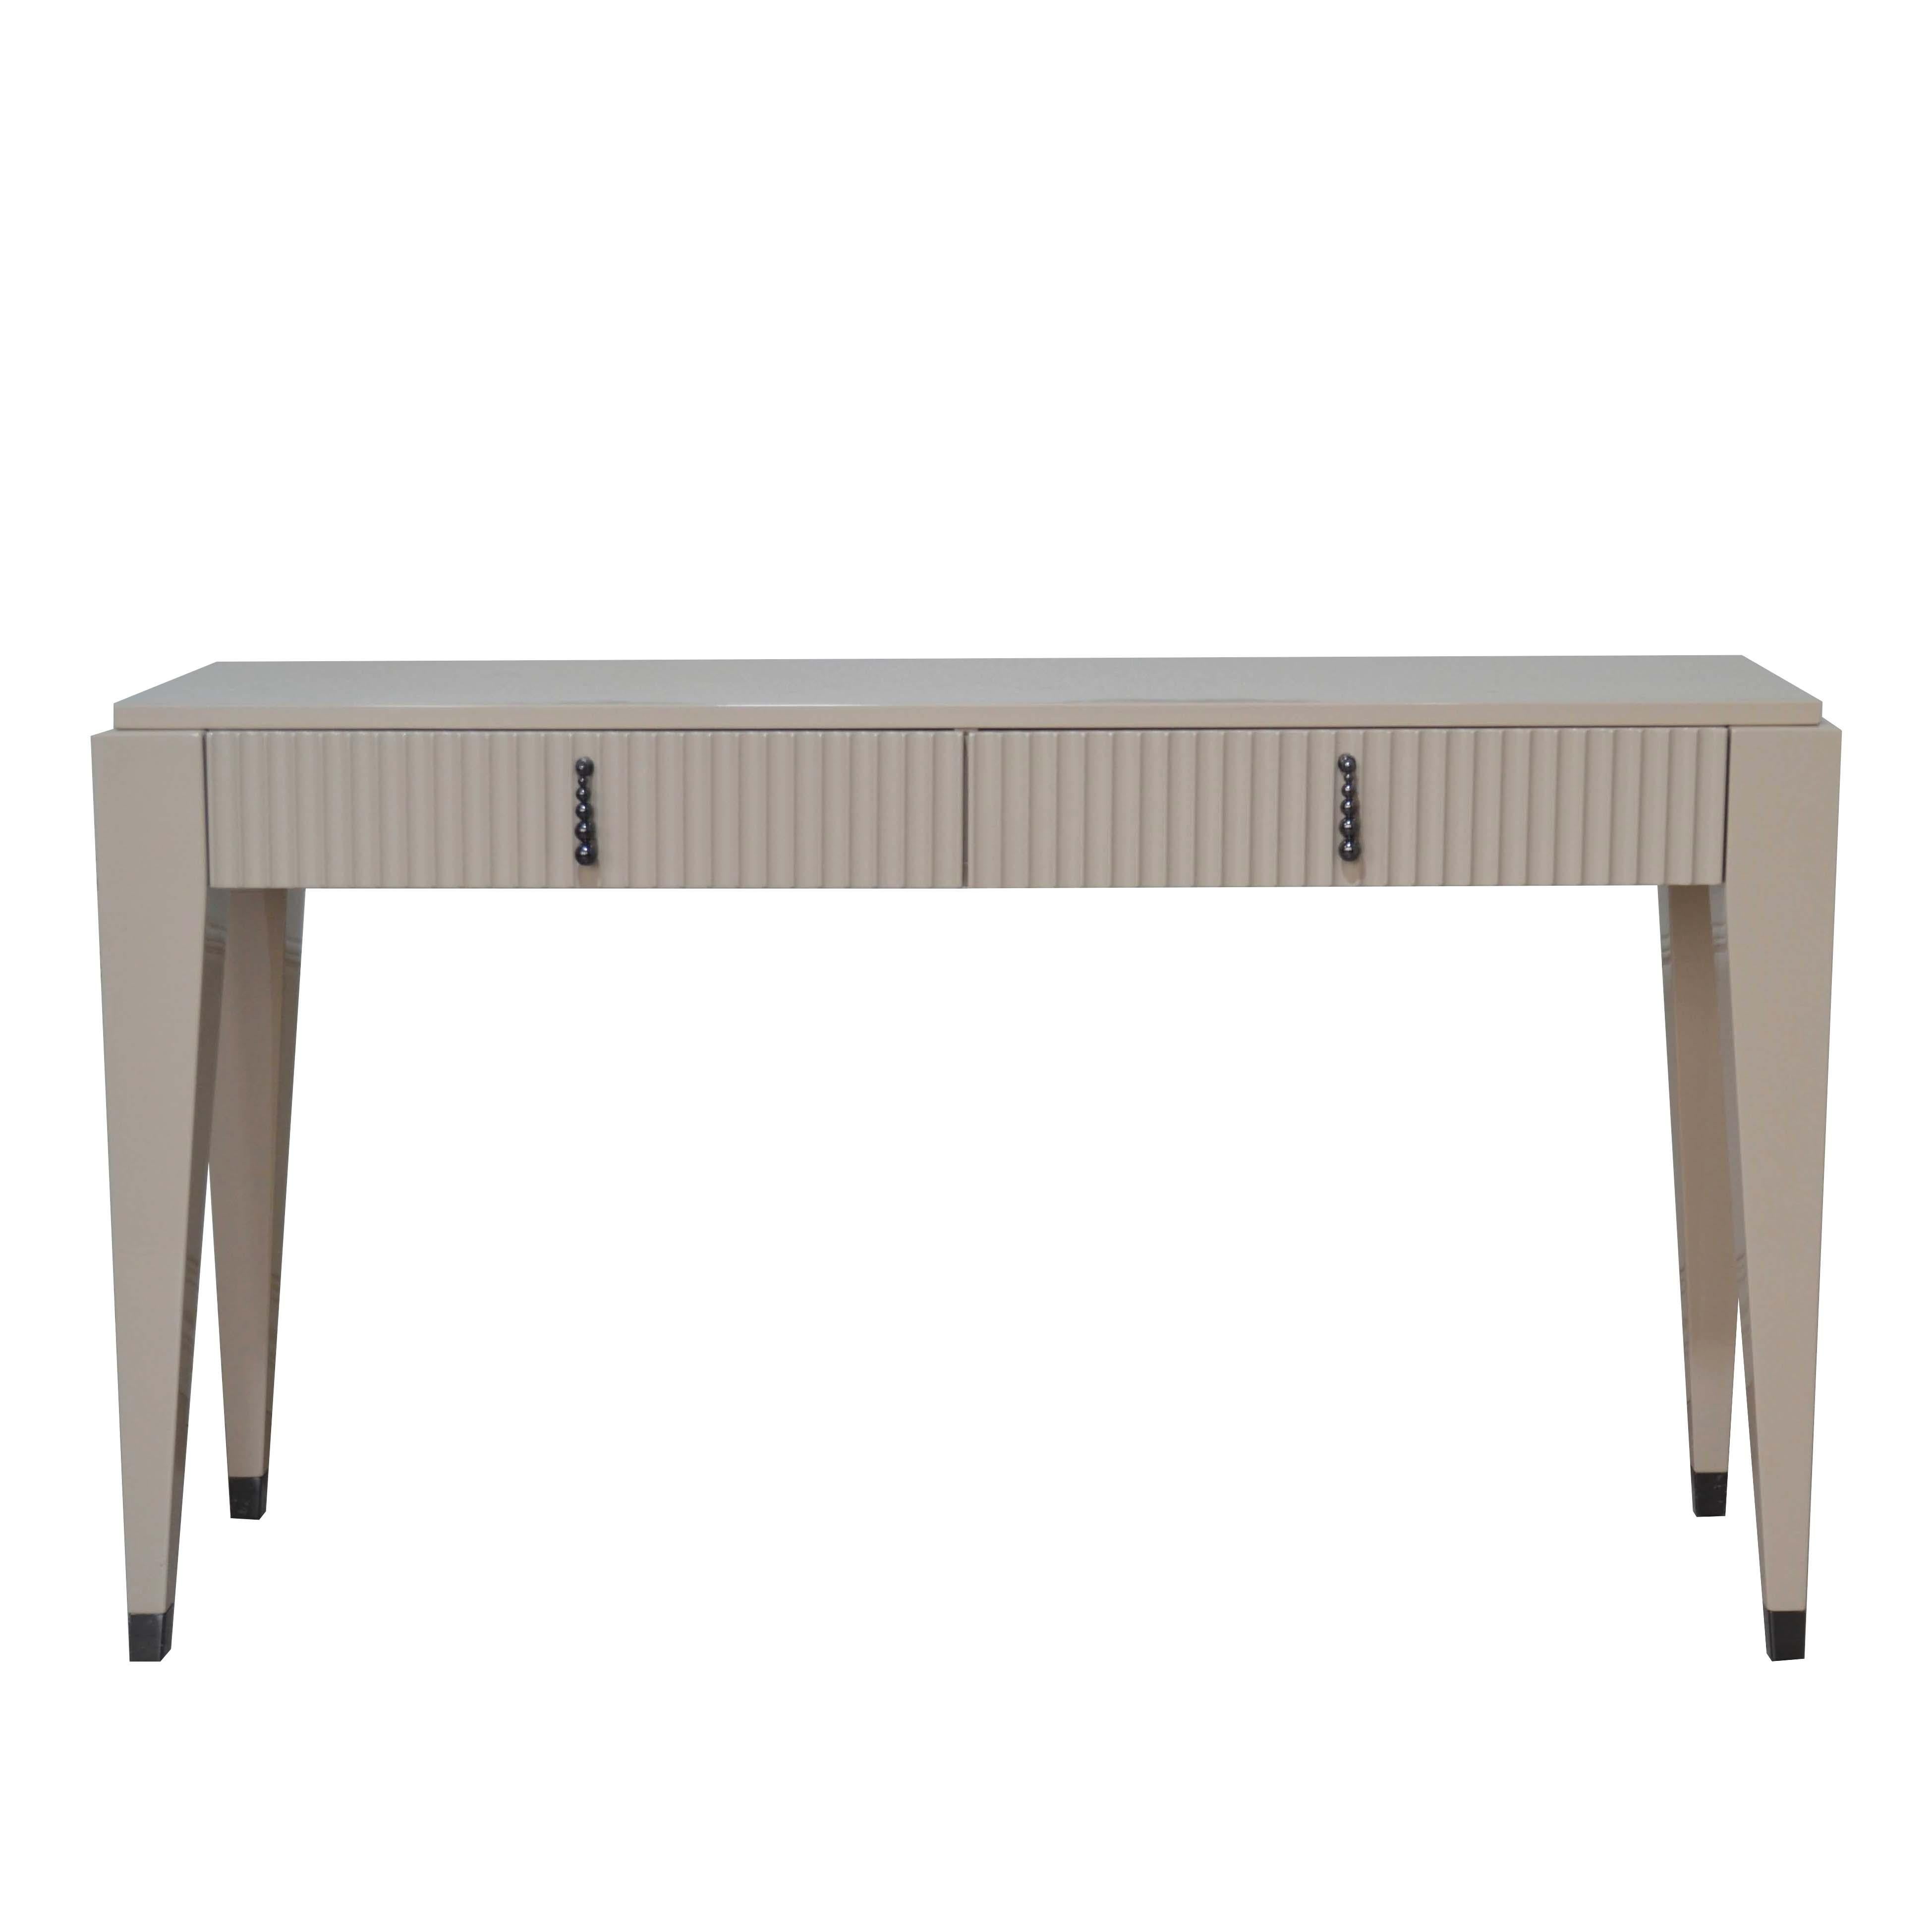 Elegant Italian beige cappuccino veneer console/writing desk from the style of Art Deco period supported on four legs with a high-gloss polish finish. In the style of CAVIO, with two drawers, that are upholstered inside. Its dimensions and